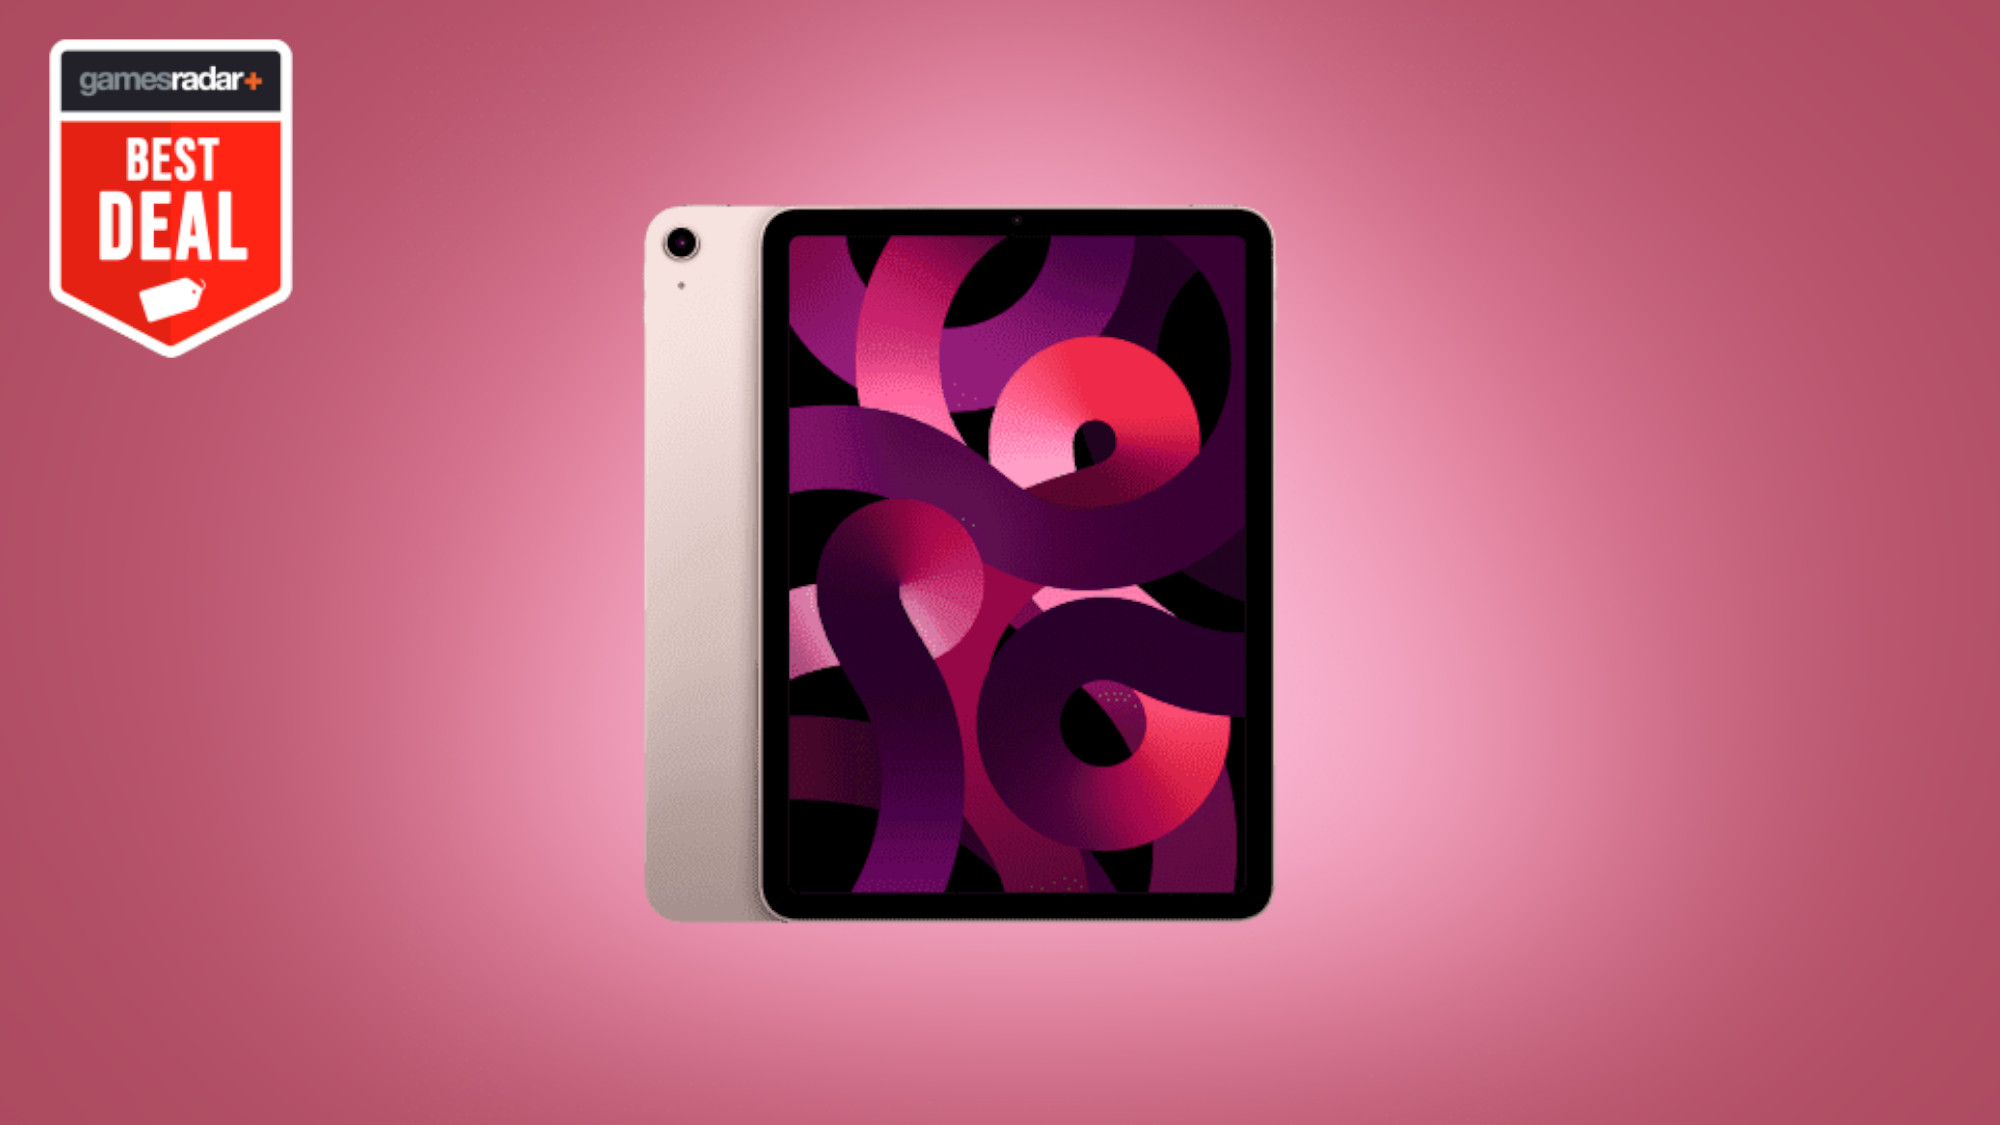 Amazon’s iPad deals just dropped the pink Air model to its lowest price ever